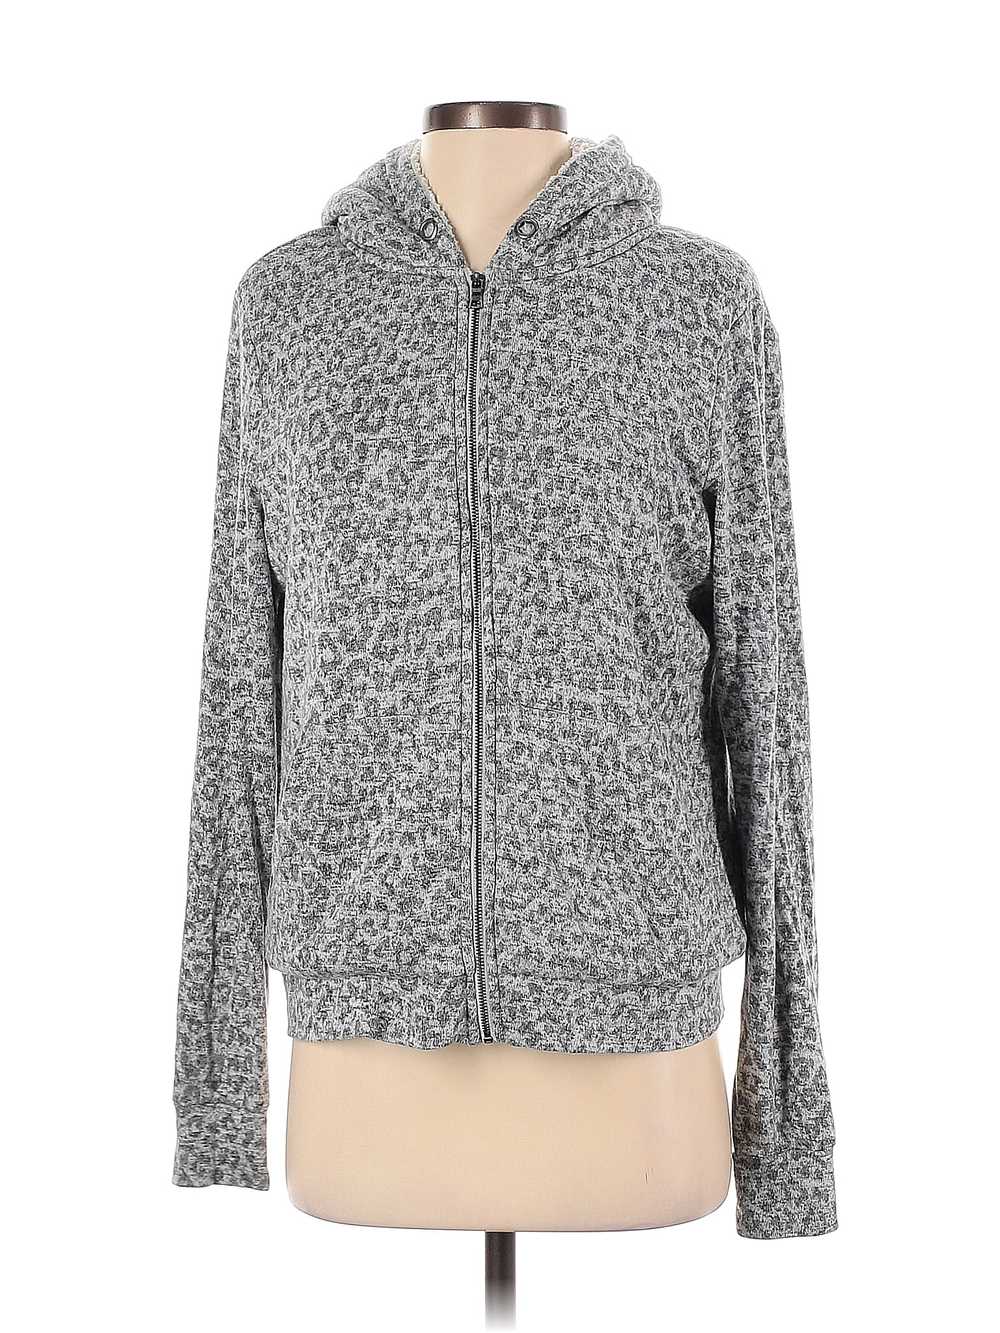 B Collection by Bobeau Women Gray Zip Up Hoodie S - image 1